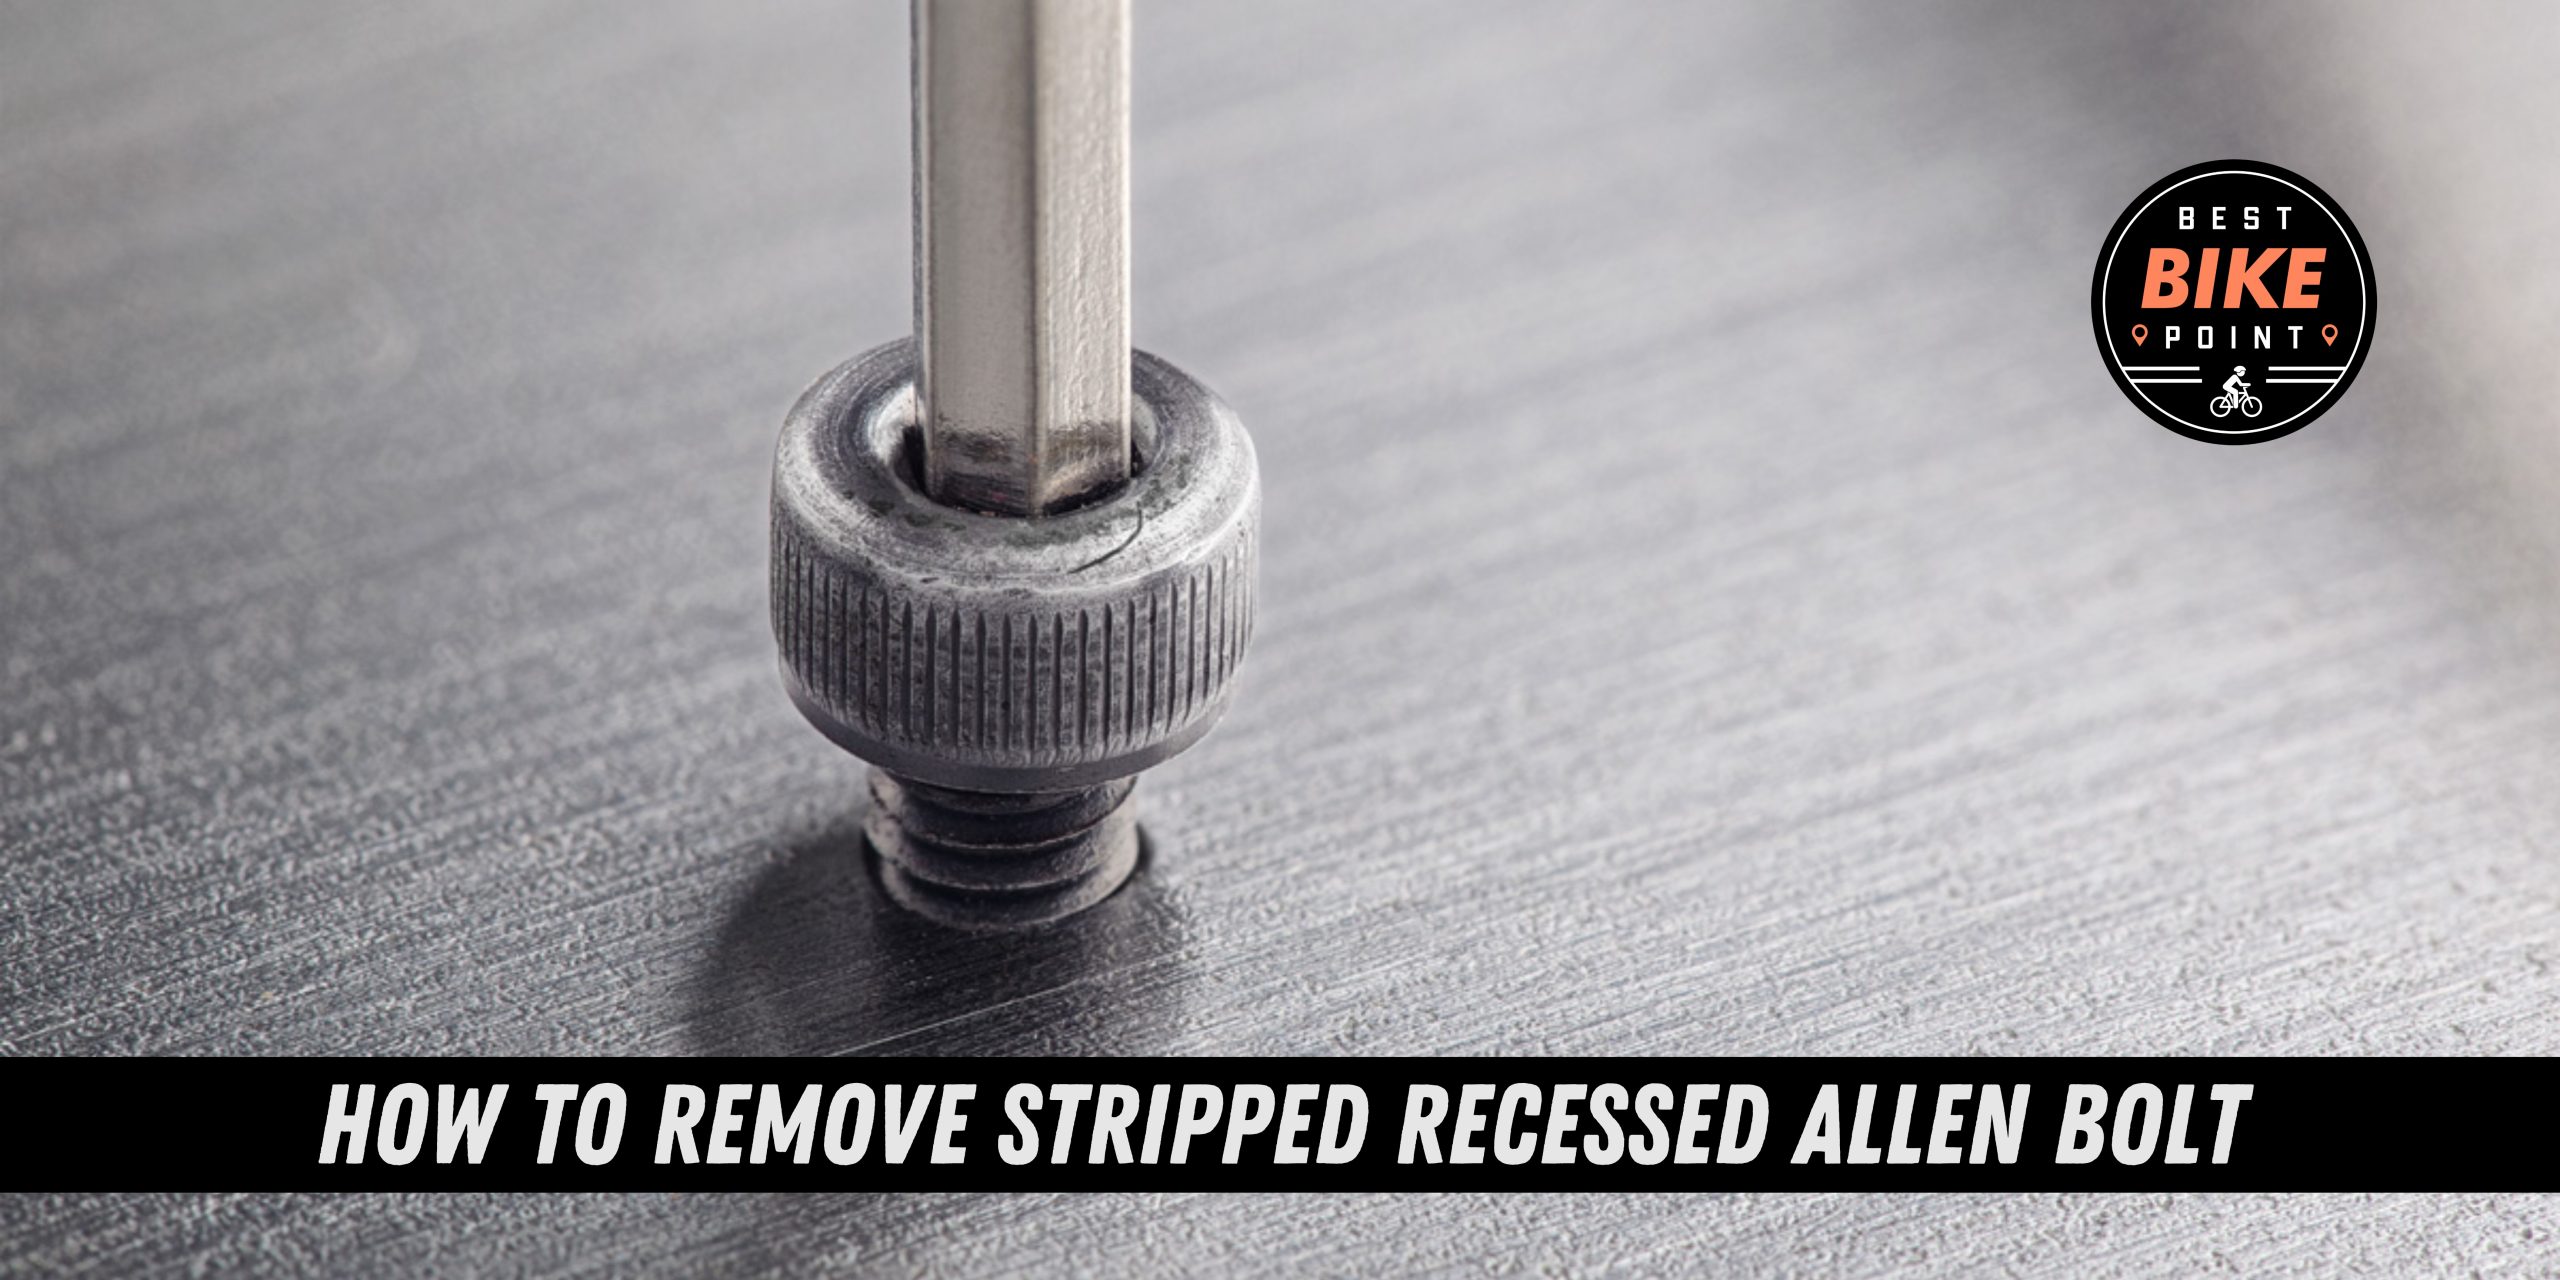 How to Remove Stripped Recessed Allen Bolt